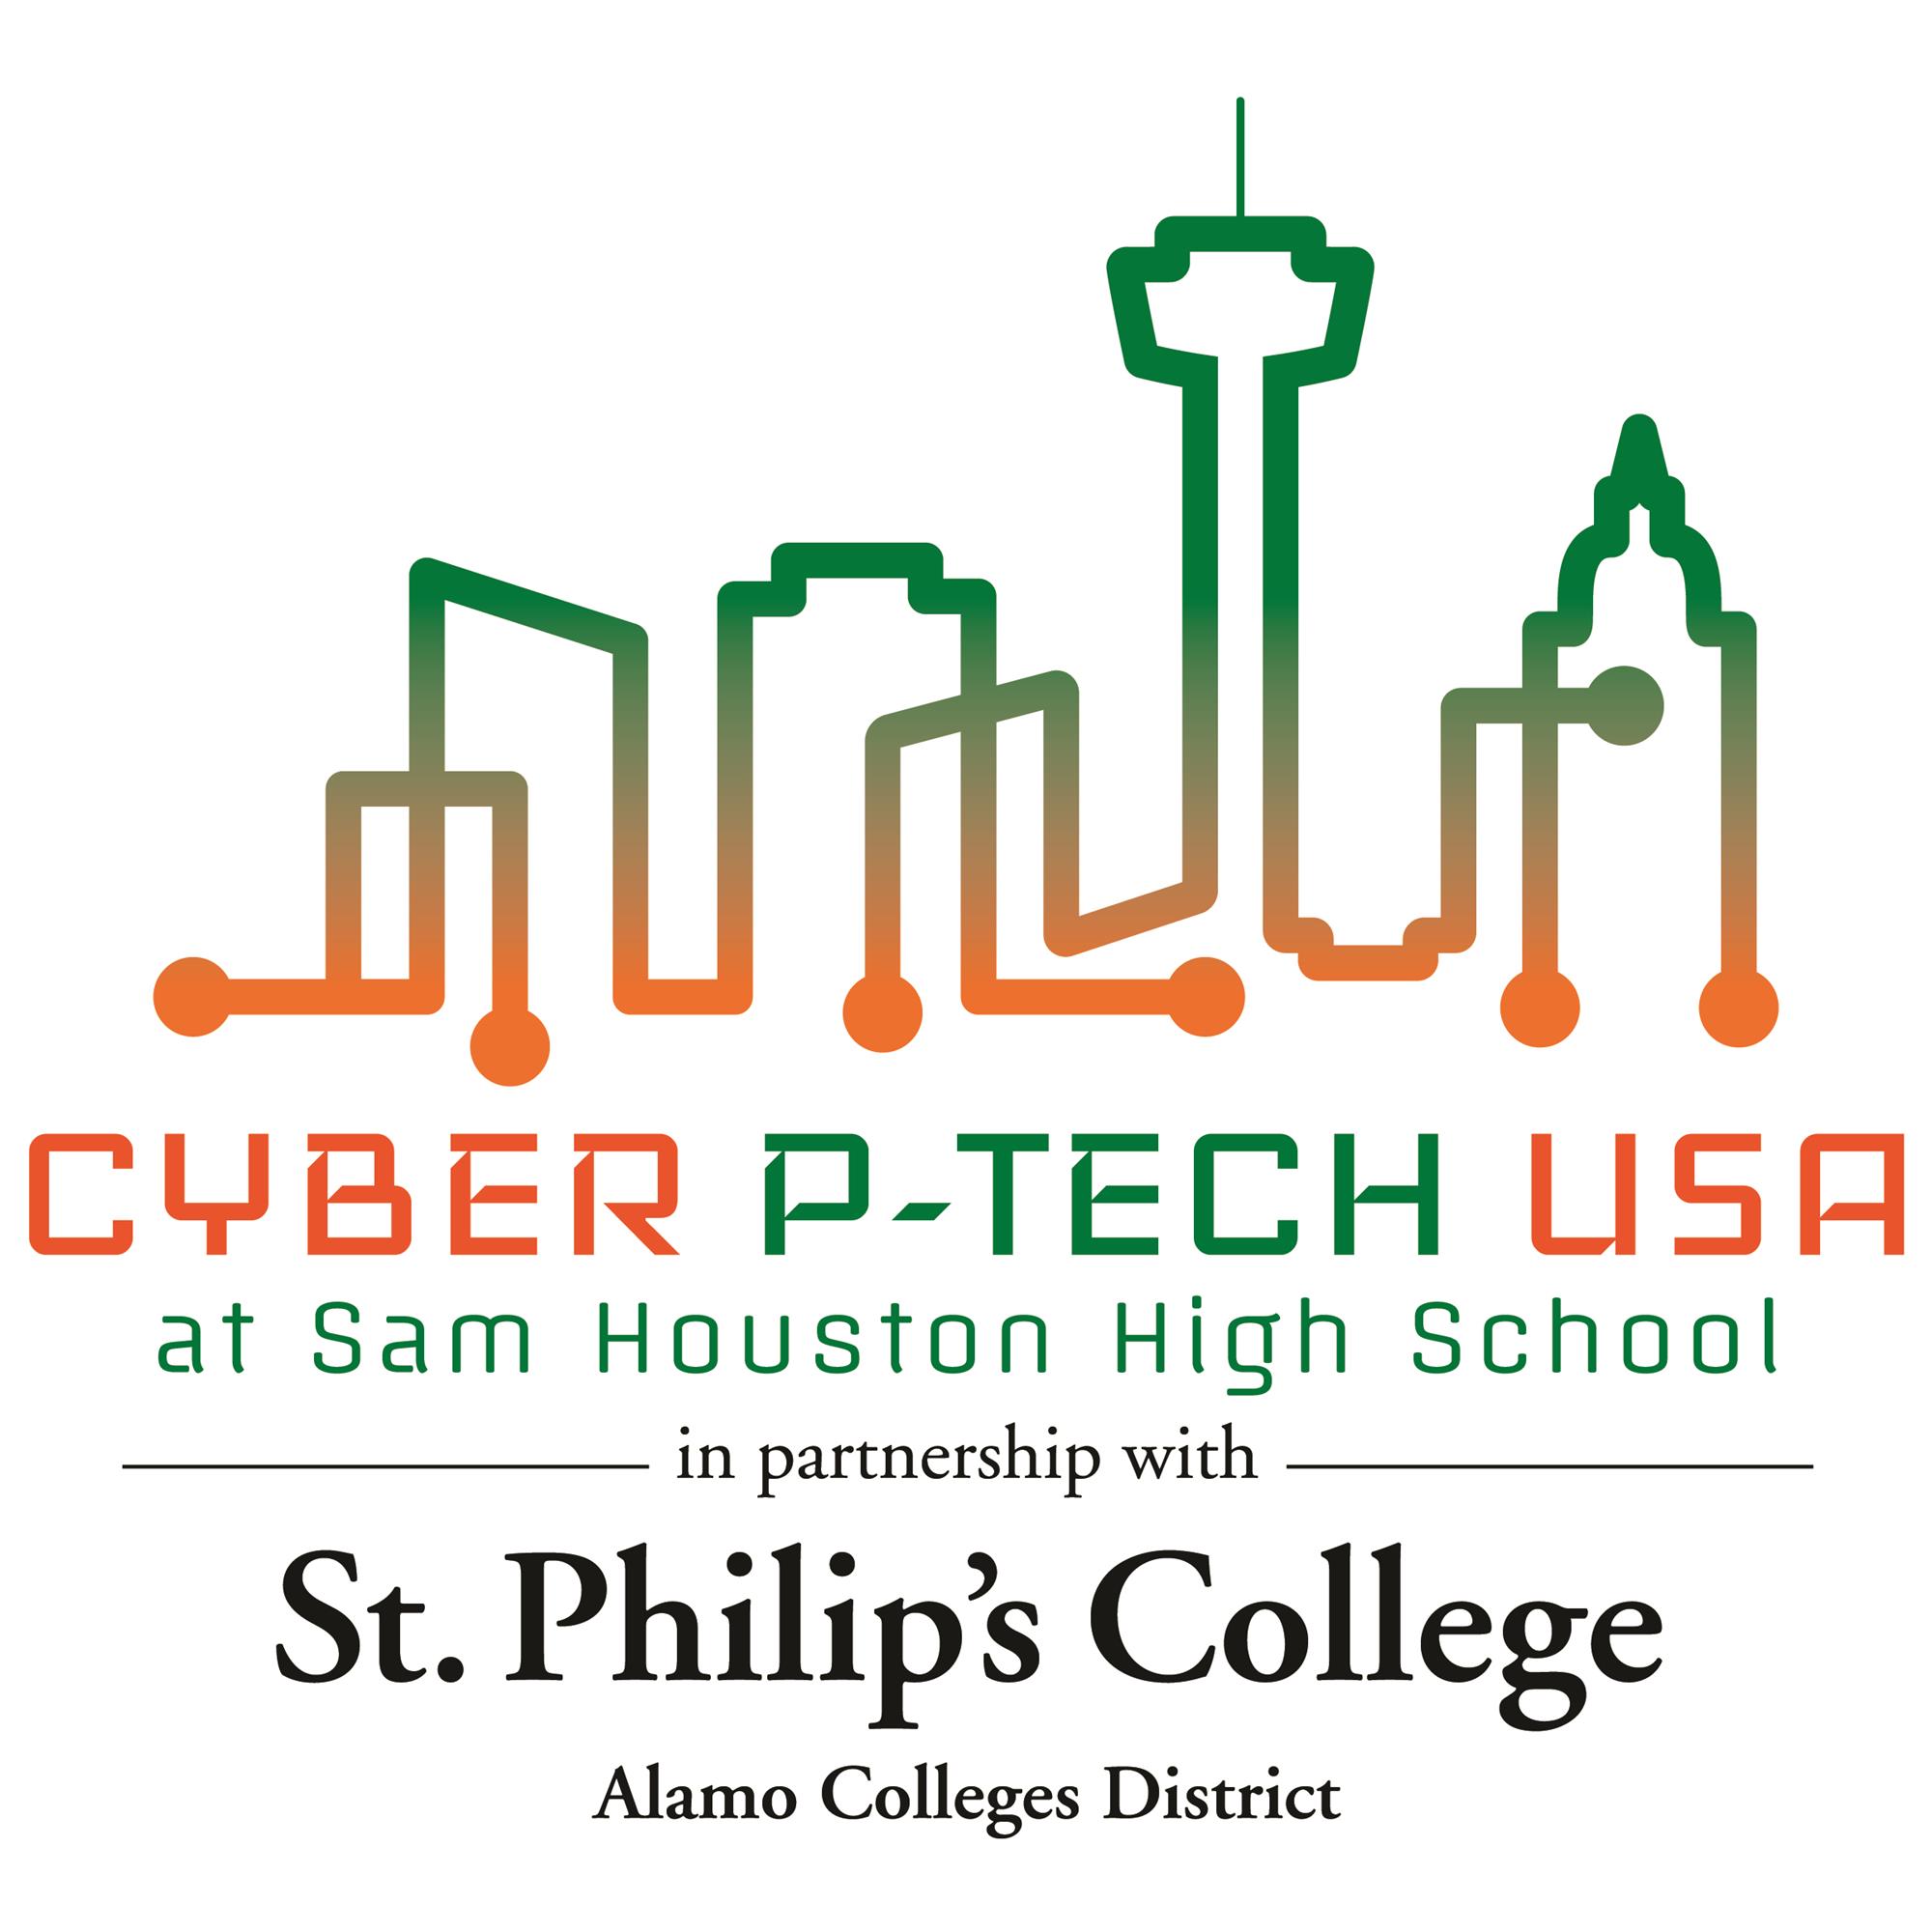 This image is the Cyber P-Tech Logo at Sam Houston